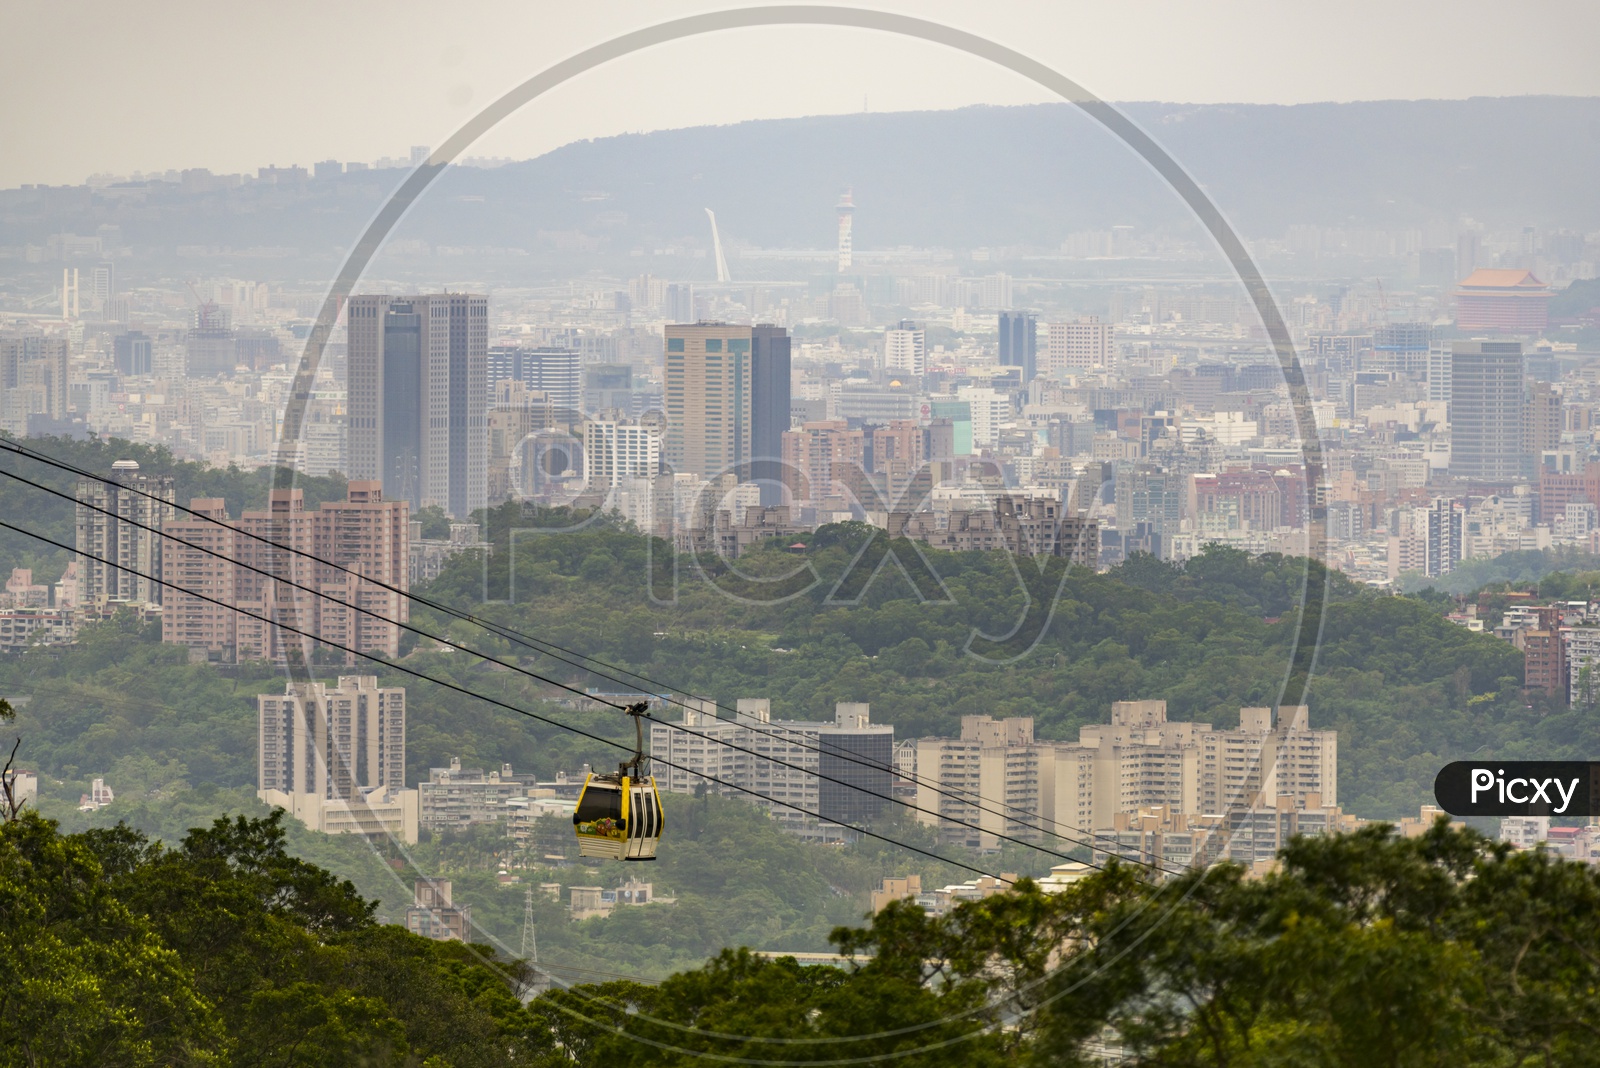 Rope Way or Cable Way With Cabin Cars With a View of City Scape